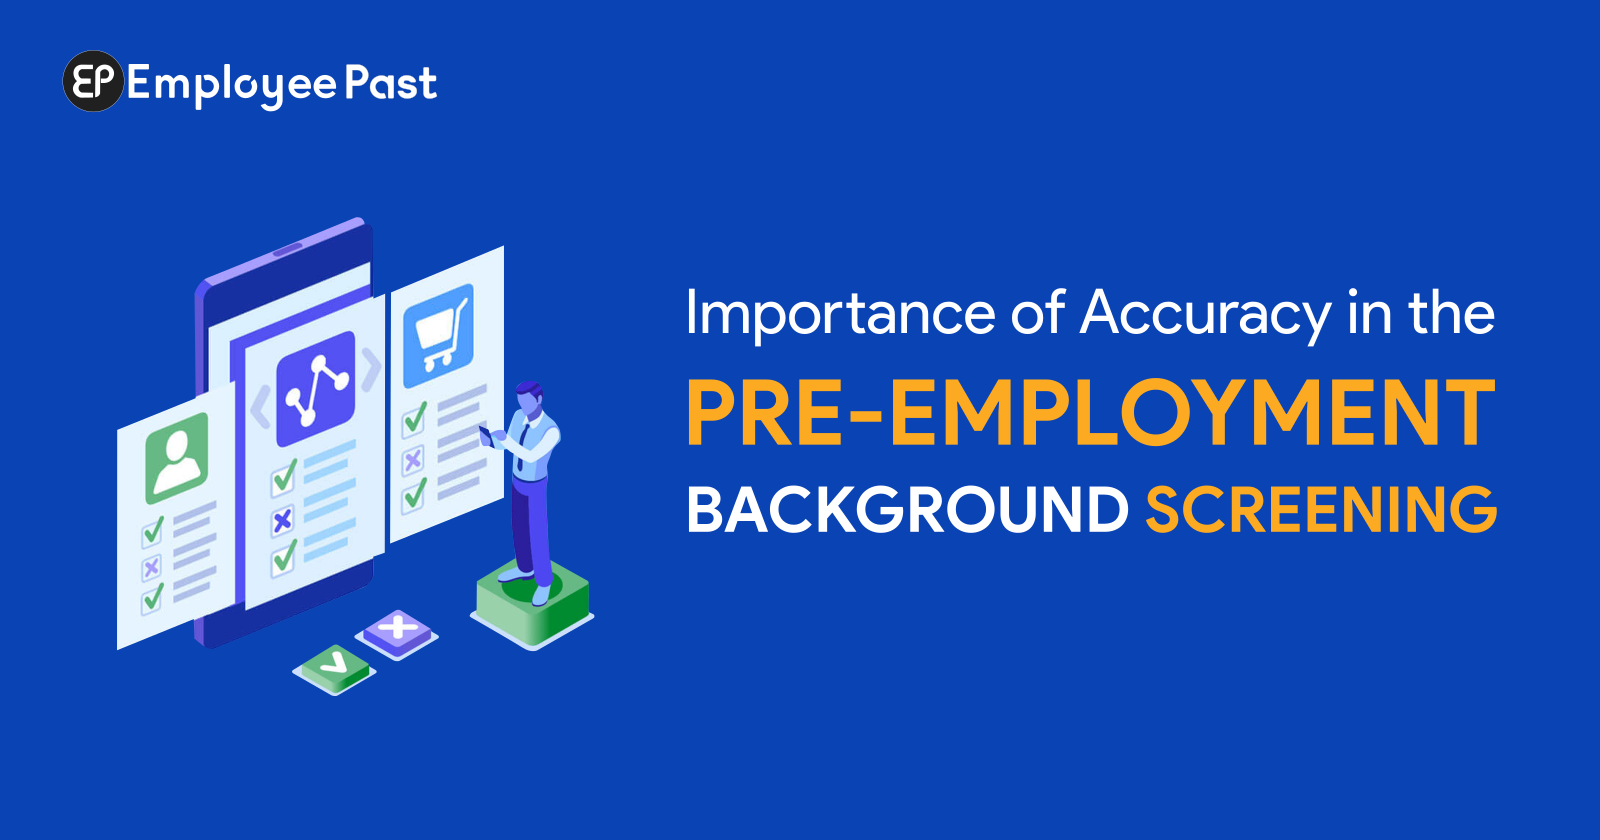 Why Accuracy is the Most Crucial in Pre-Employment Background Screening?